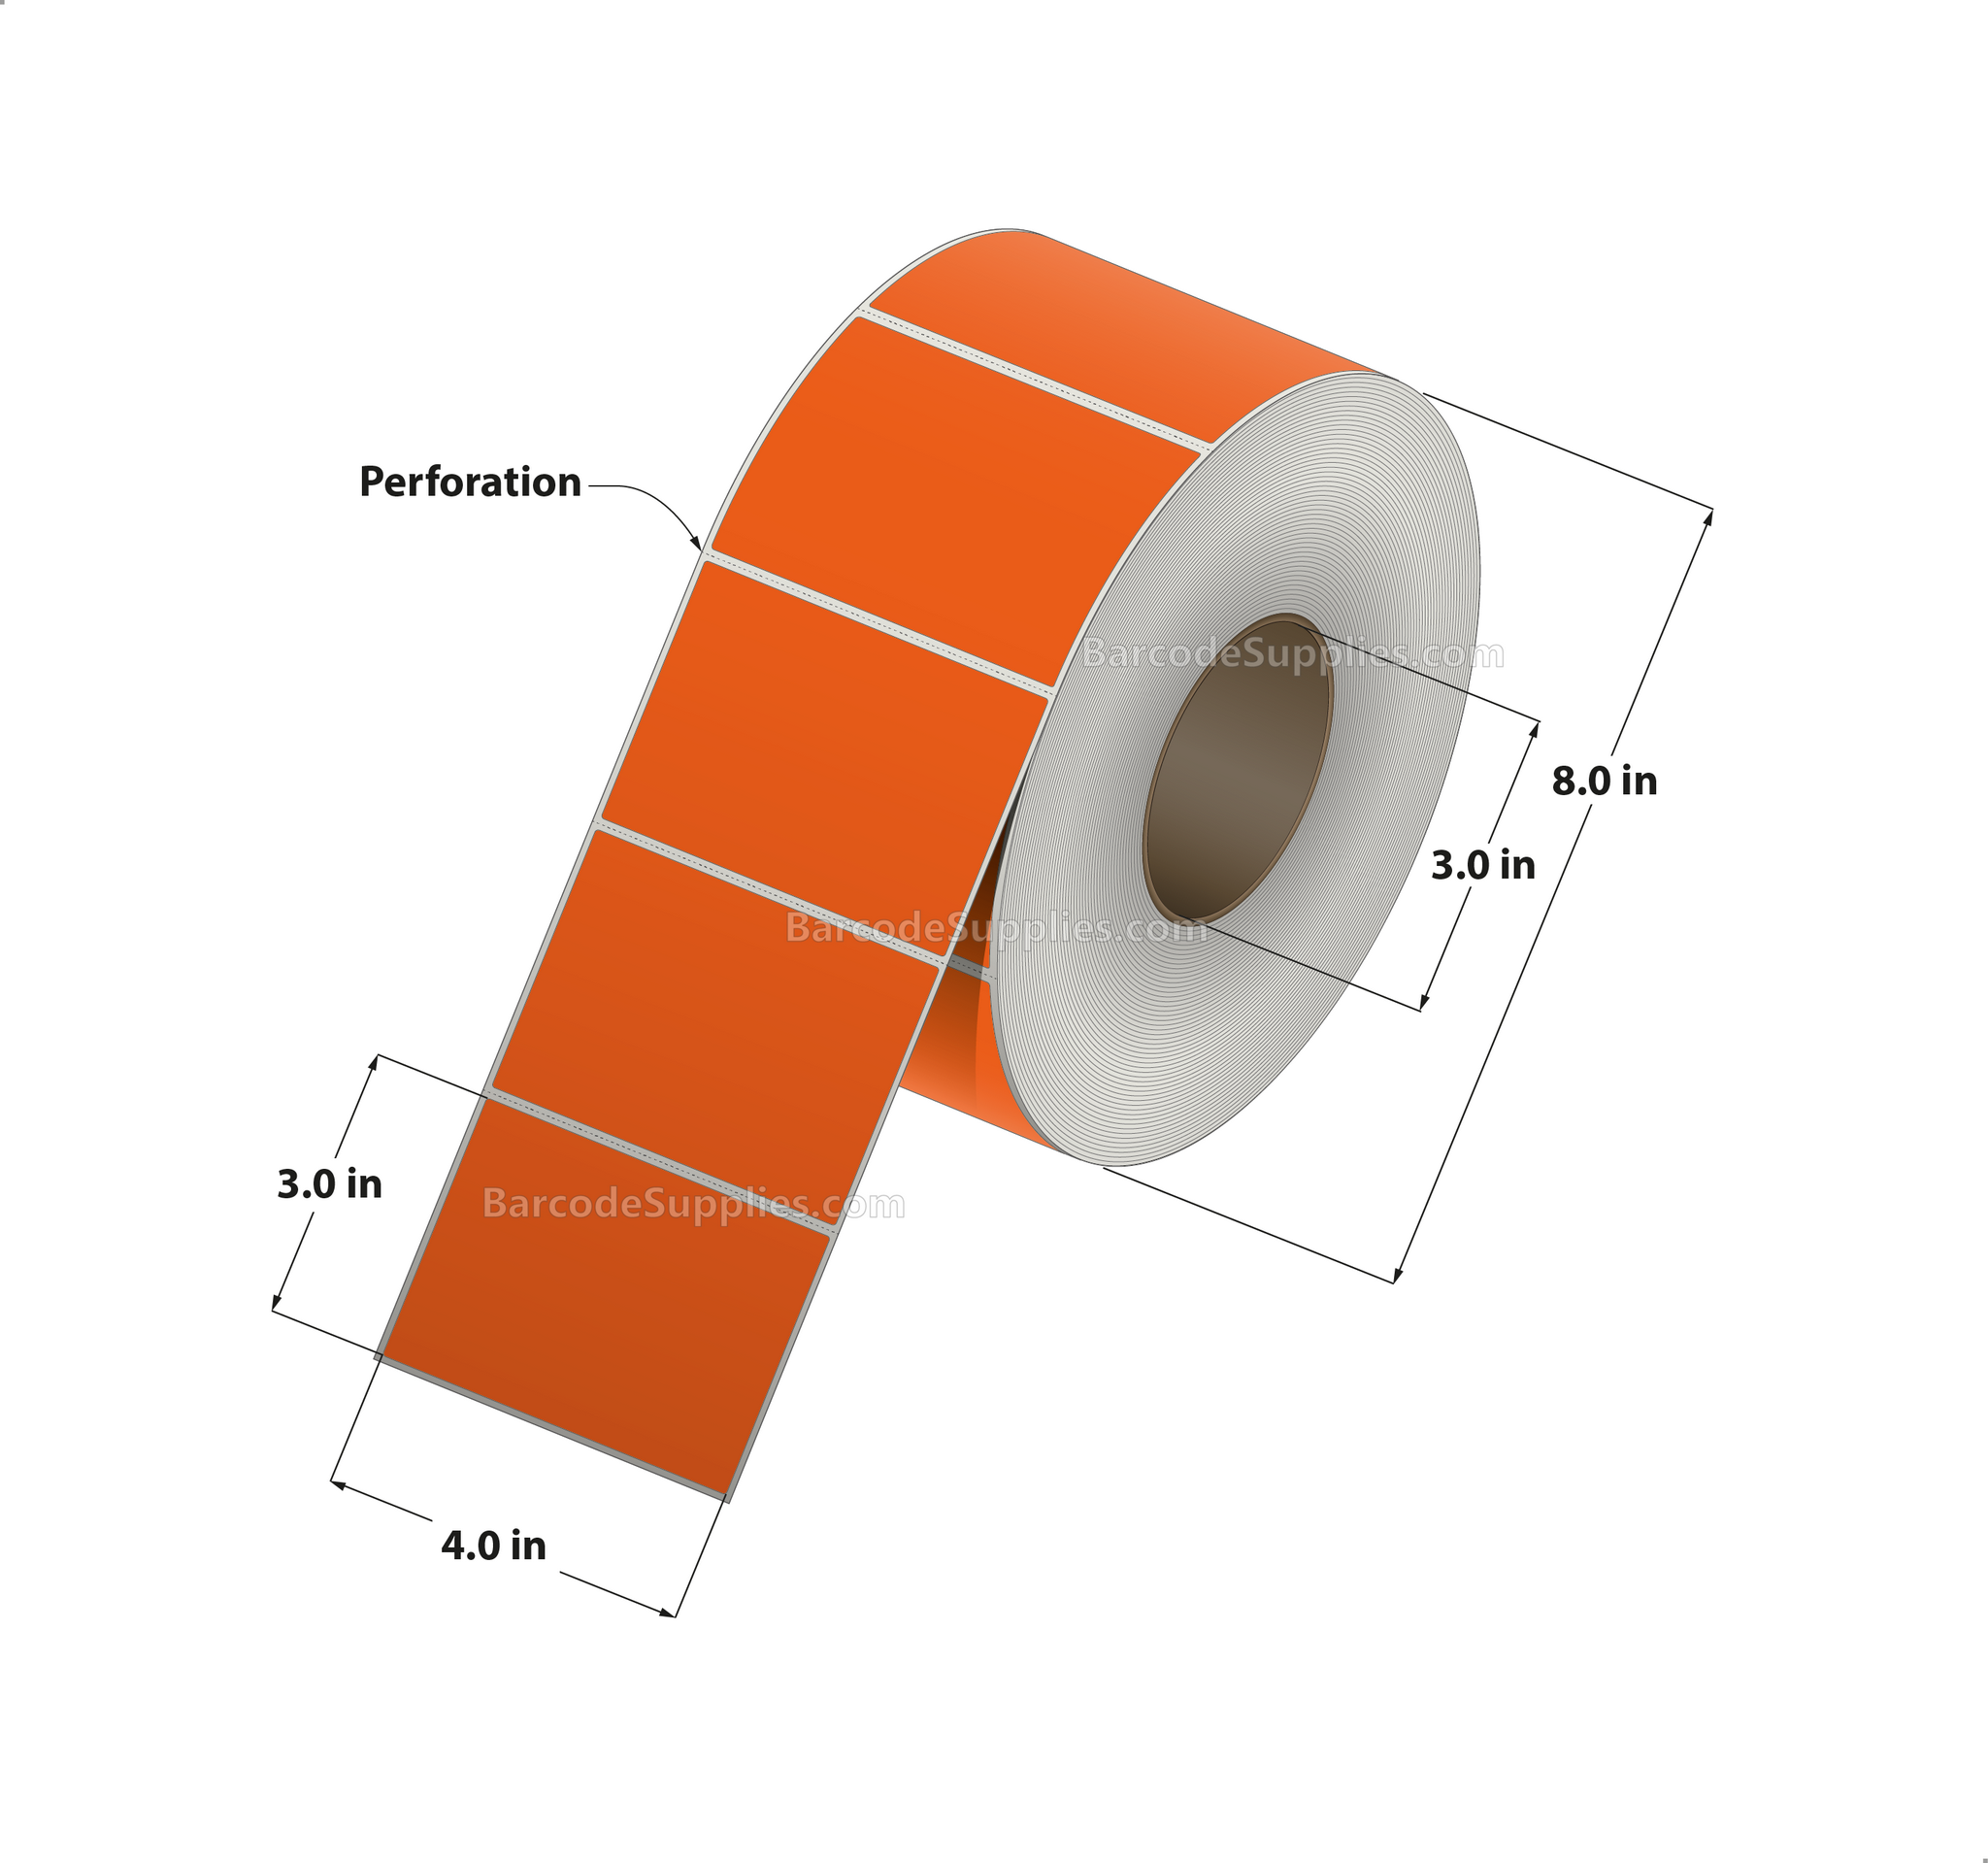 4 x 3 Direct Thermal Orange Labels With Acrylic Adhesive - Perforated - 1900 Labels Per Roll - Carton Of 4 Rolls - 7600 Labels Total - MPN: RD-4-3-1900-OR